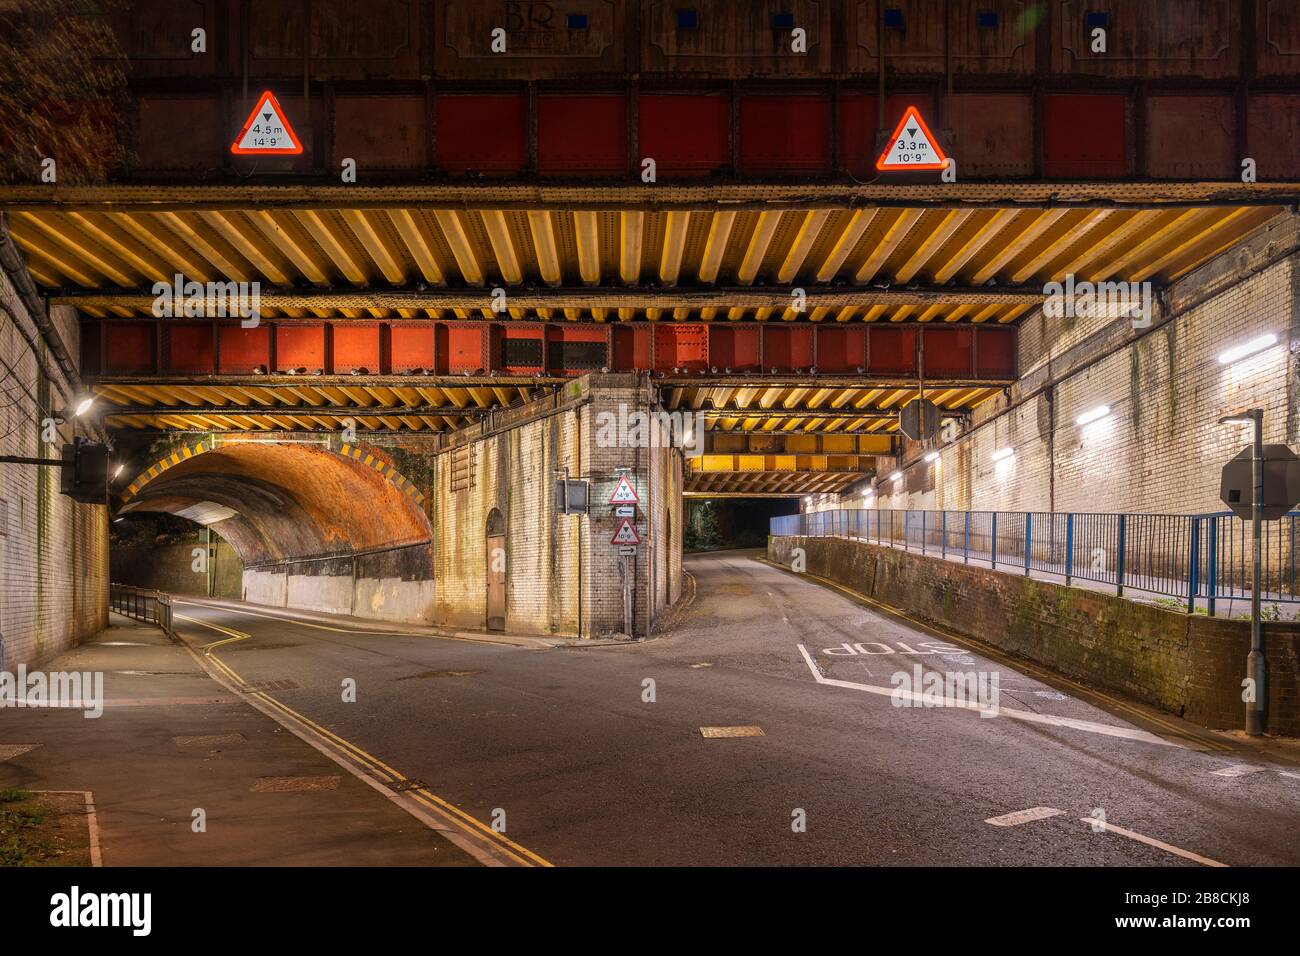 Vyne Road / Chapel Hill railway bridge E1/135A on railway line BML1 in Basingstoke at night time. RBE steel girder and brick arch construction. Stock Photo